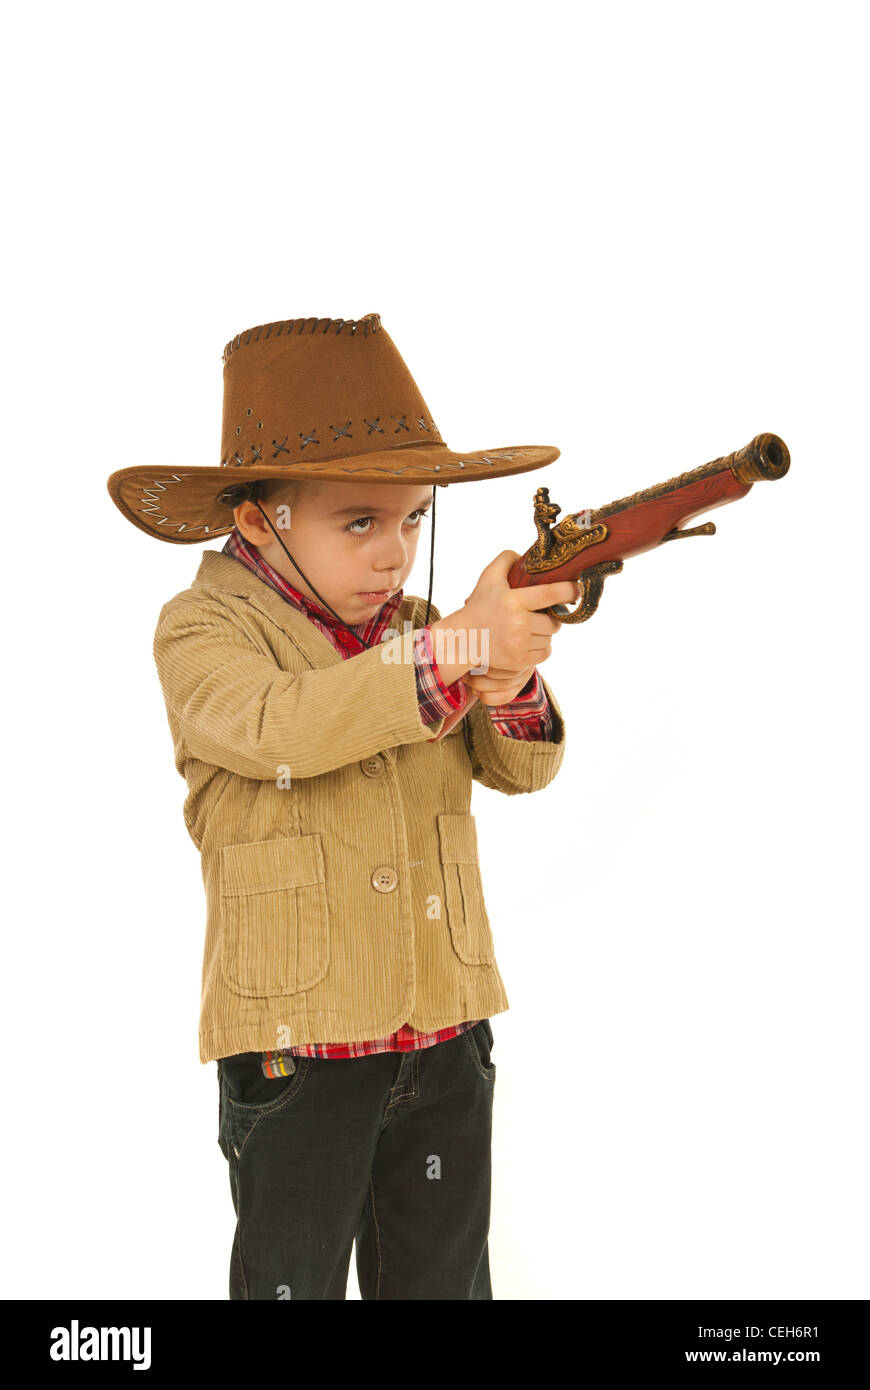 Small cowboy boy with hat playing with gun toy isolated on white background Stock Photo